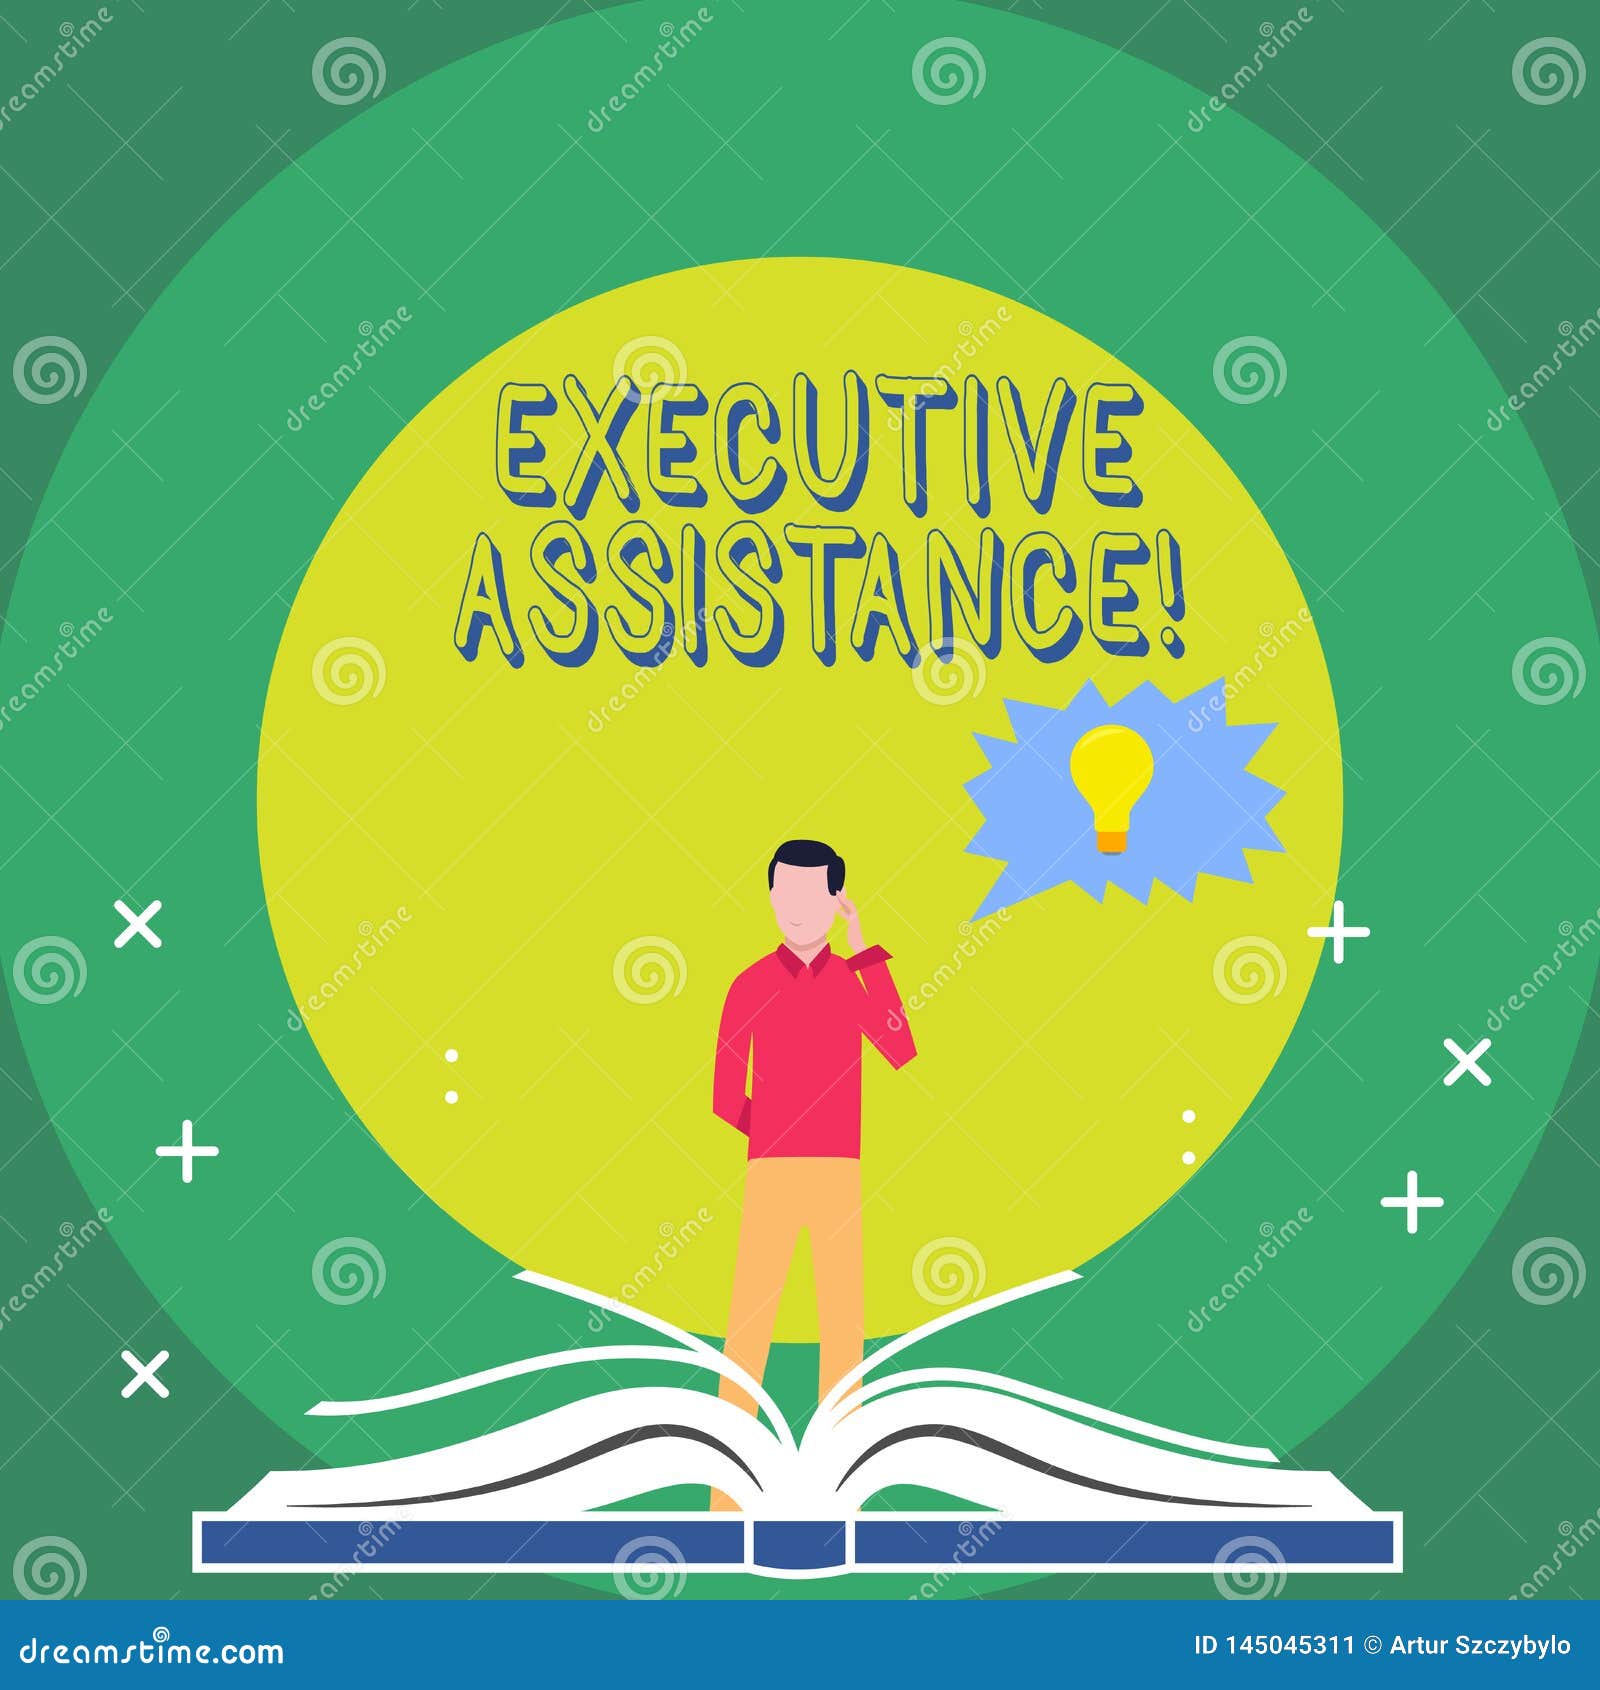 https://thumbs.dreamstime.com/z/word-writing-text-executive-assistance-business-concept-focus-providing-highlevel-administrative-support-man-standing-photo-145045311.jpg